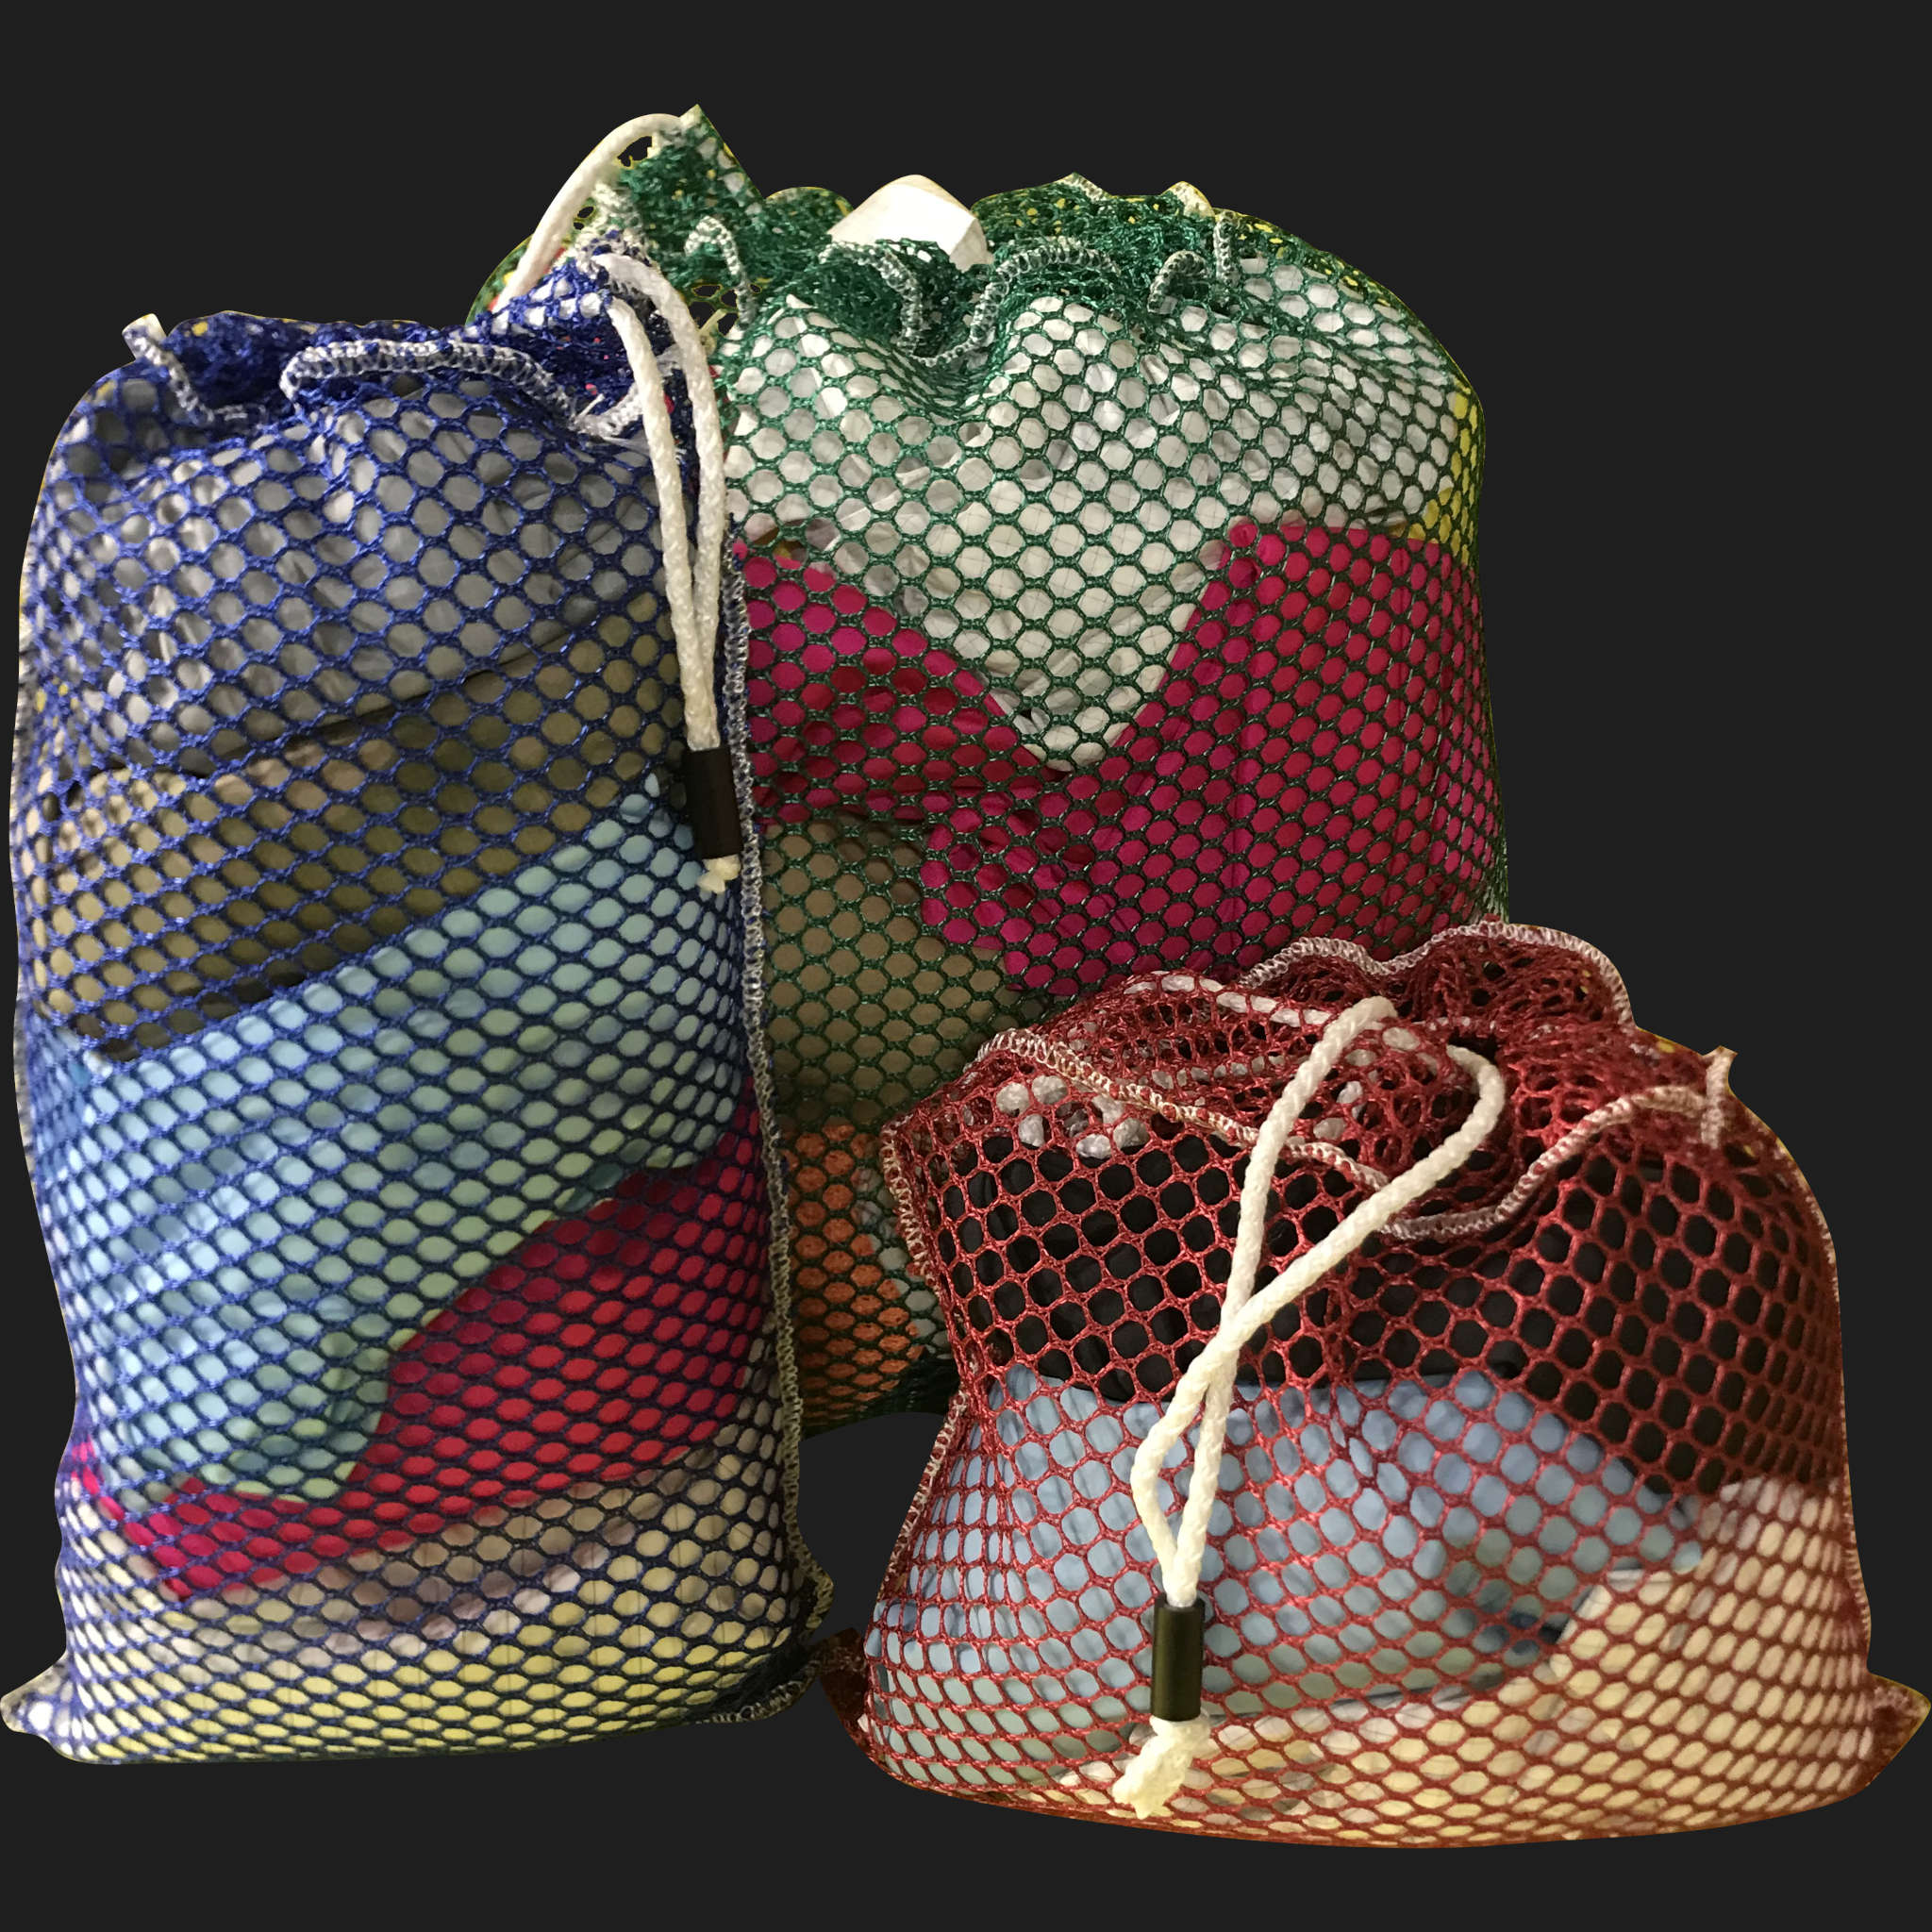 50" x 76" Customized Mesh-Net-Laundry Bags Heavy Duty with Cord and barrellock closure